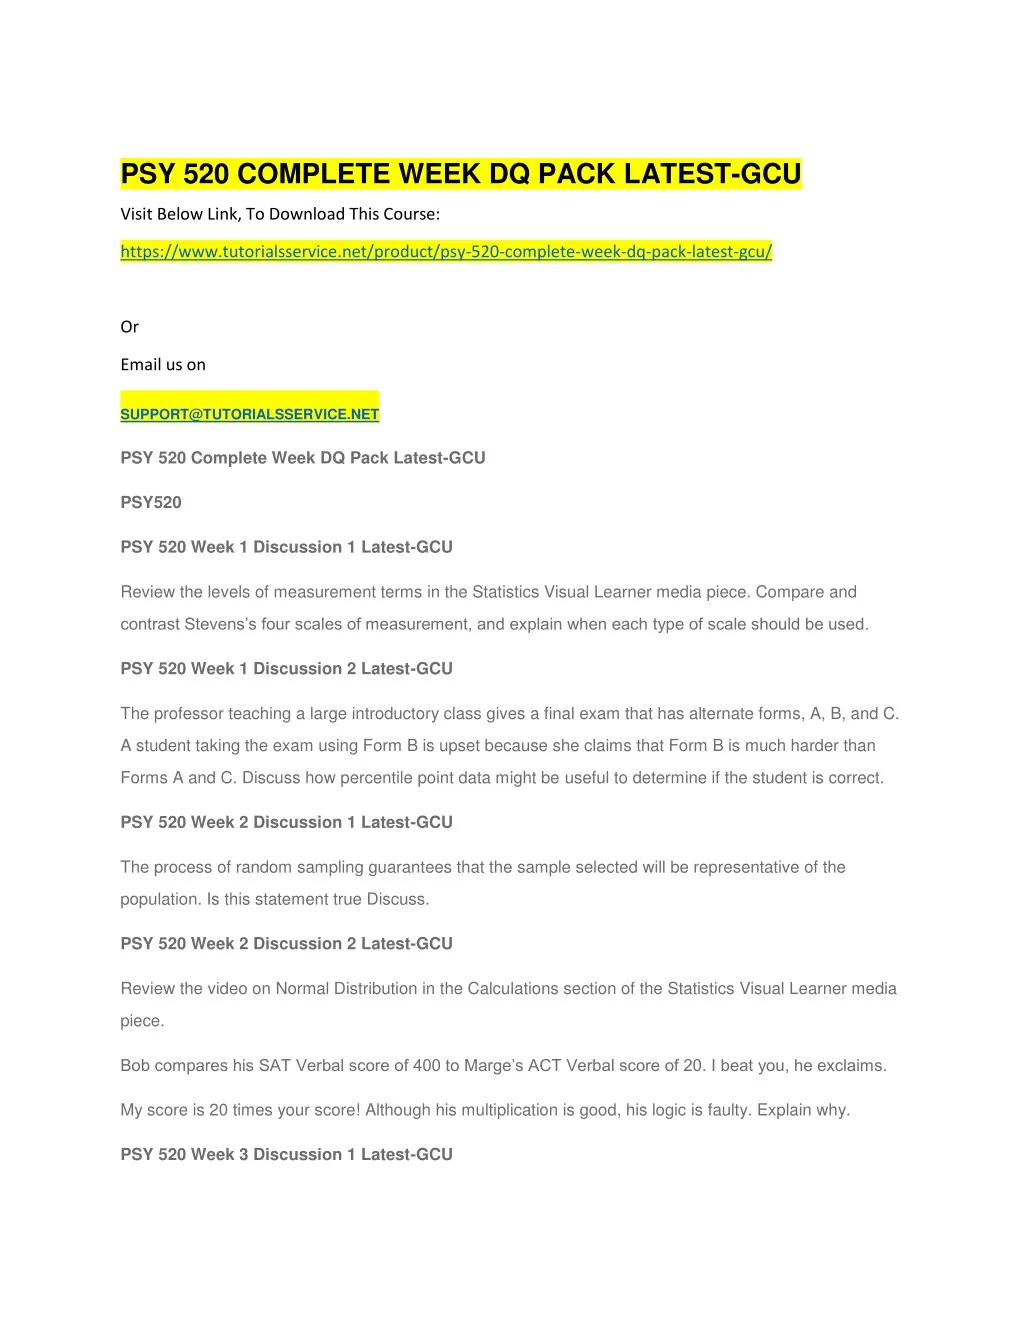 psy 520 complete week dq pack latest gcu